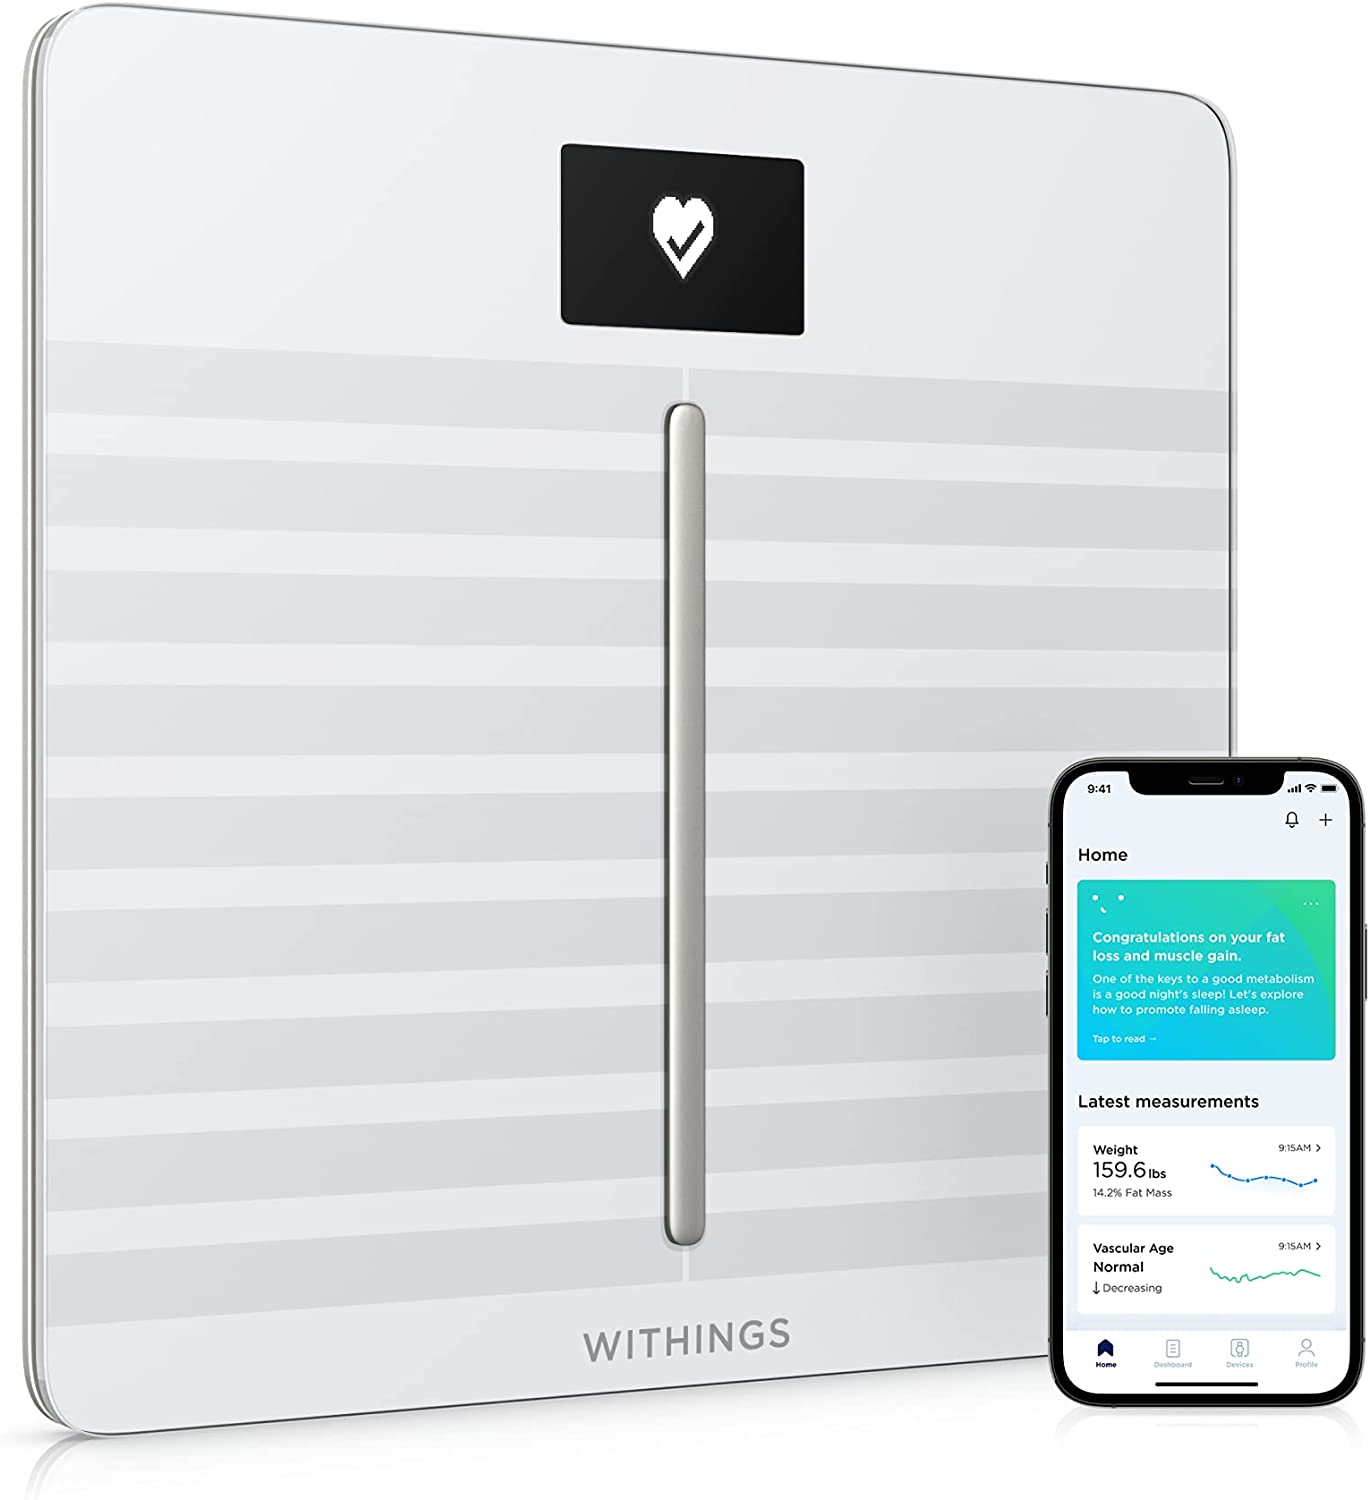 Withings Body Cardio – Premium Wi-Fi Body Composition Smart Scale, Tracks Heart Health, Vascular Age, BMI, Fat, Muscle & Bone Mass, Water %, Digital Bathroom Scale with App Sync via Bluetooth or Wi-Fi